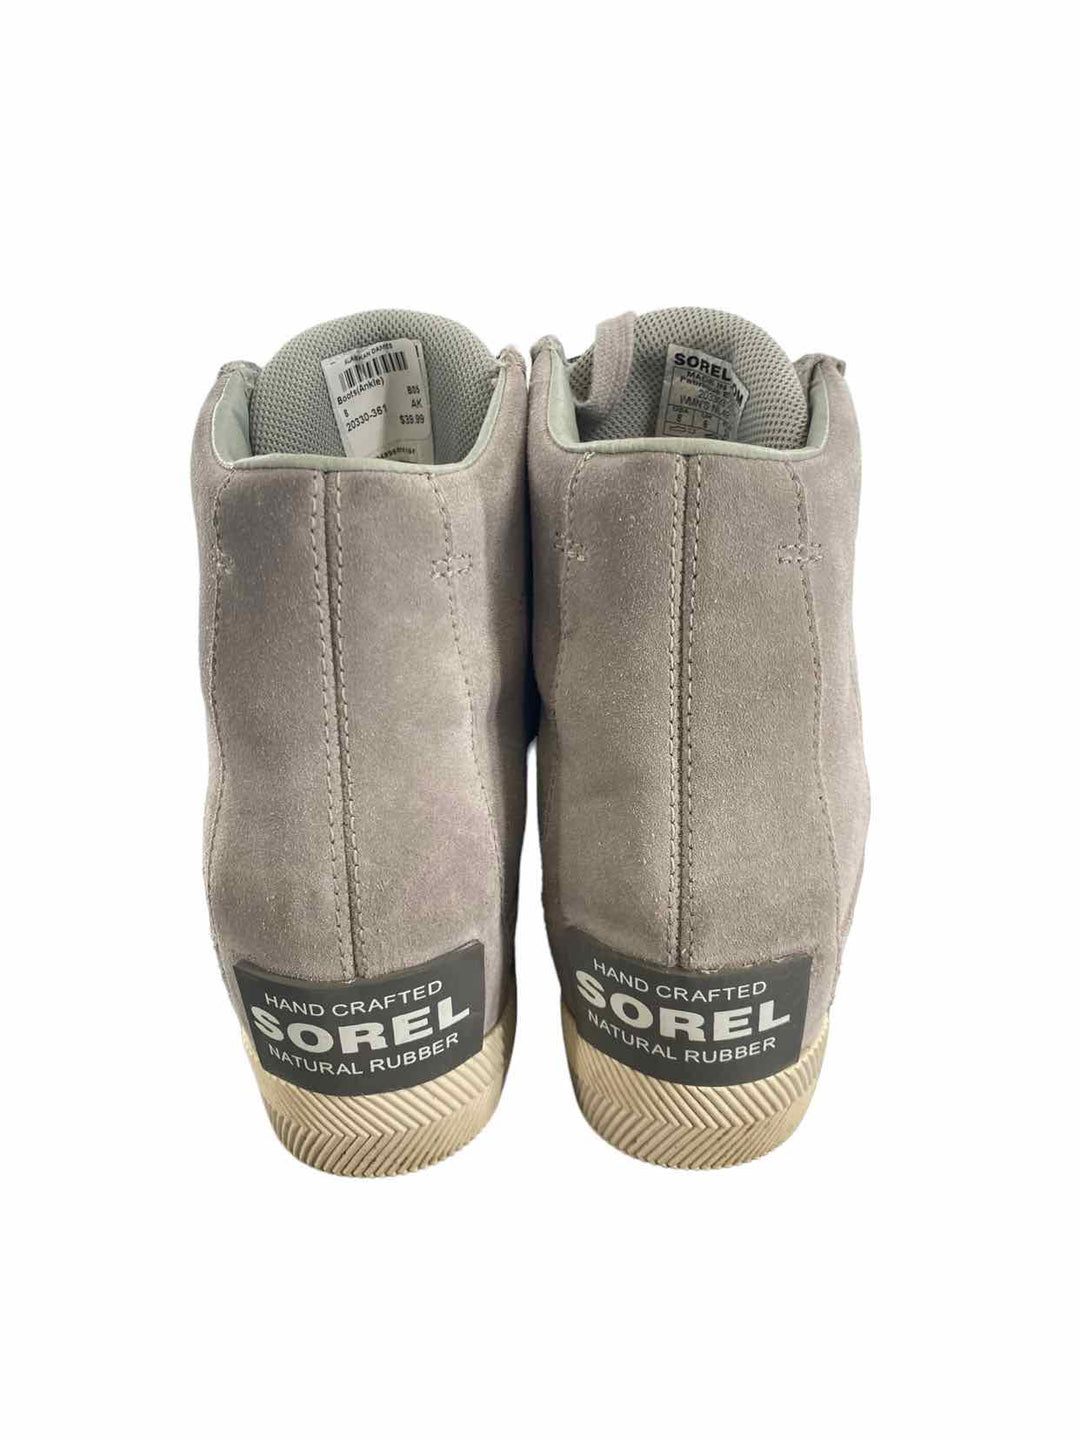 Sorel Shoe Size 8 Gray Suede Boots(Ankle)